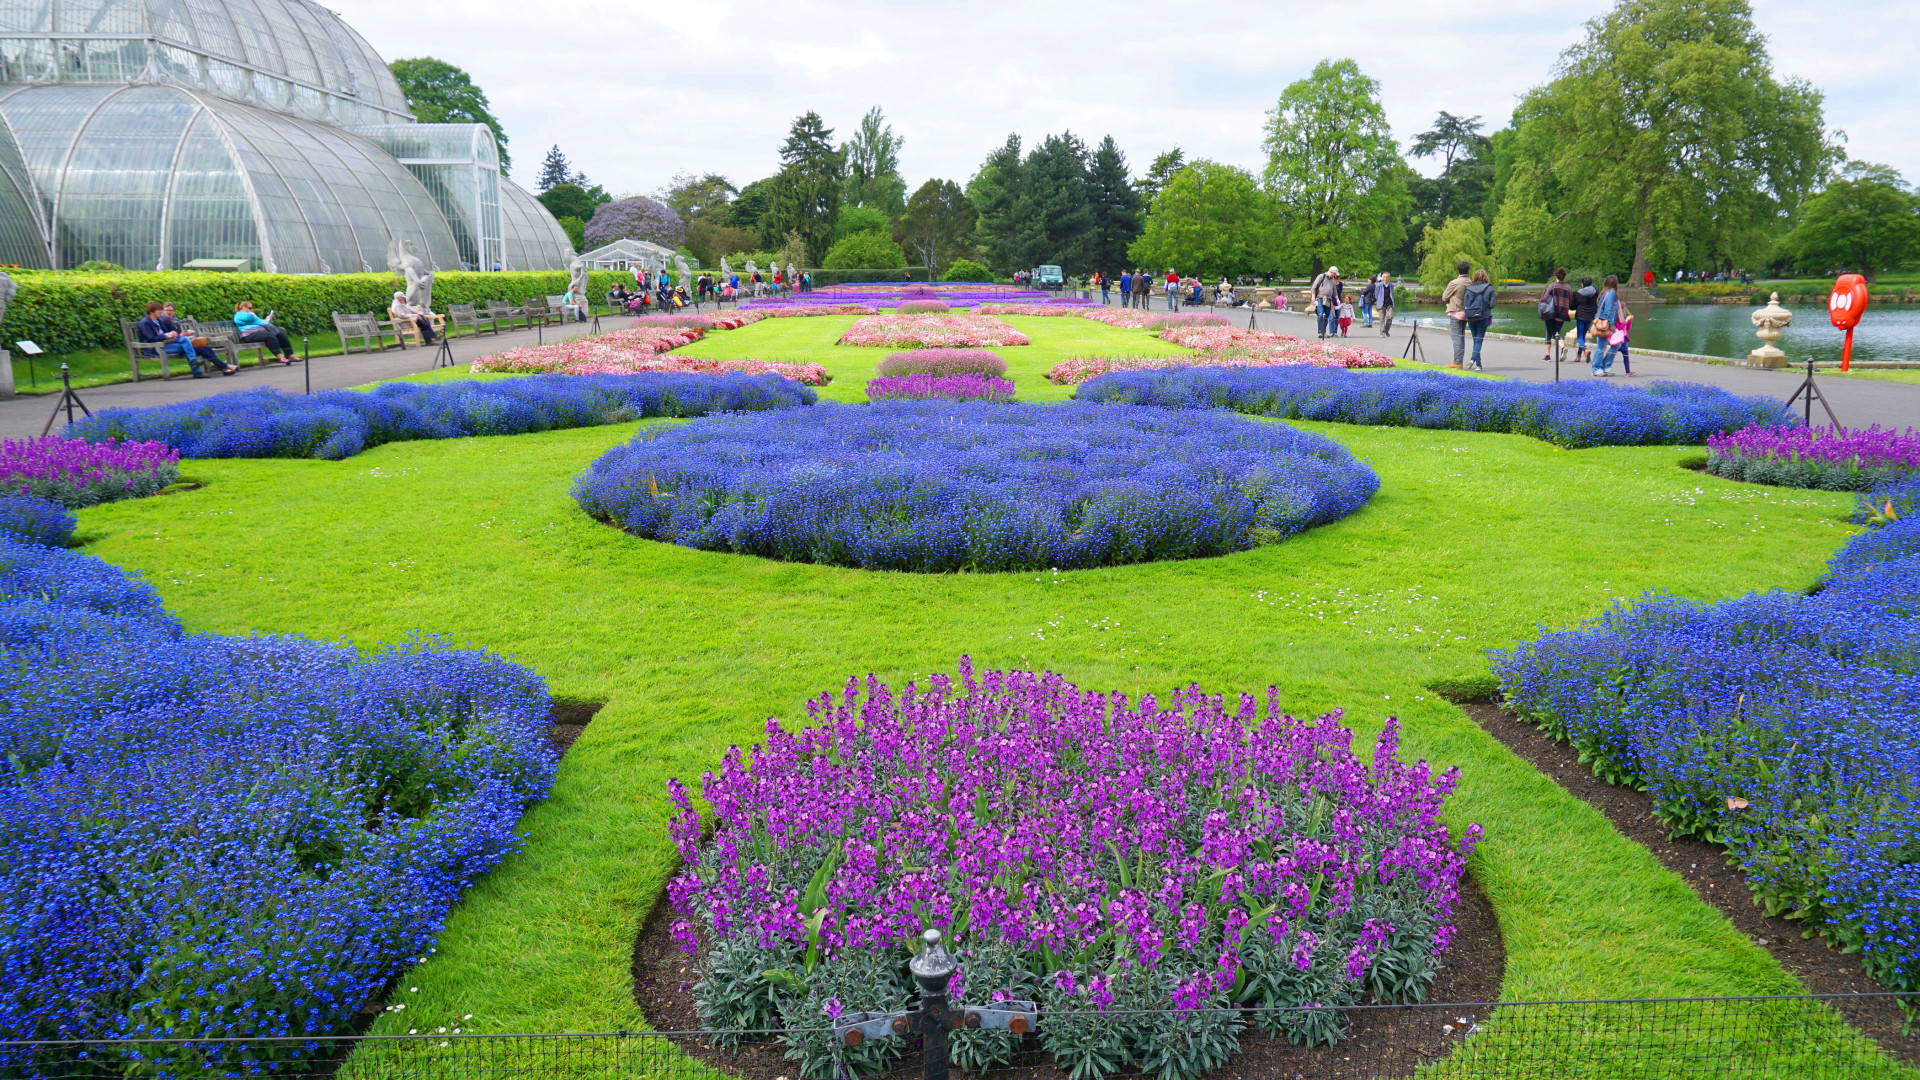 The famous Royal Botanic Gardens and the glasshouse galleries at Kew. <p>You may also like:<a href="https://www.starsinsider.com/n/285049?utm_source=msn.com&utm_medium=display&utm_campaign=referral_description&utm_content=344596v2en-en"> The uncomfortable stories behind famous film and TV love scenes </a></p>